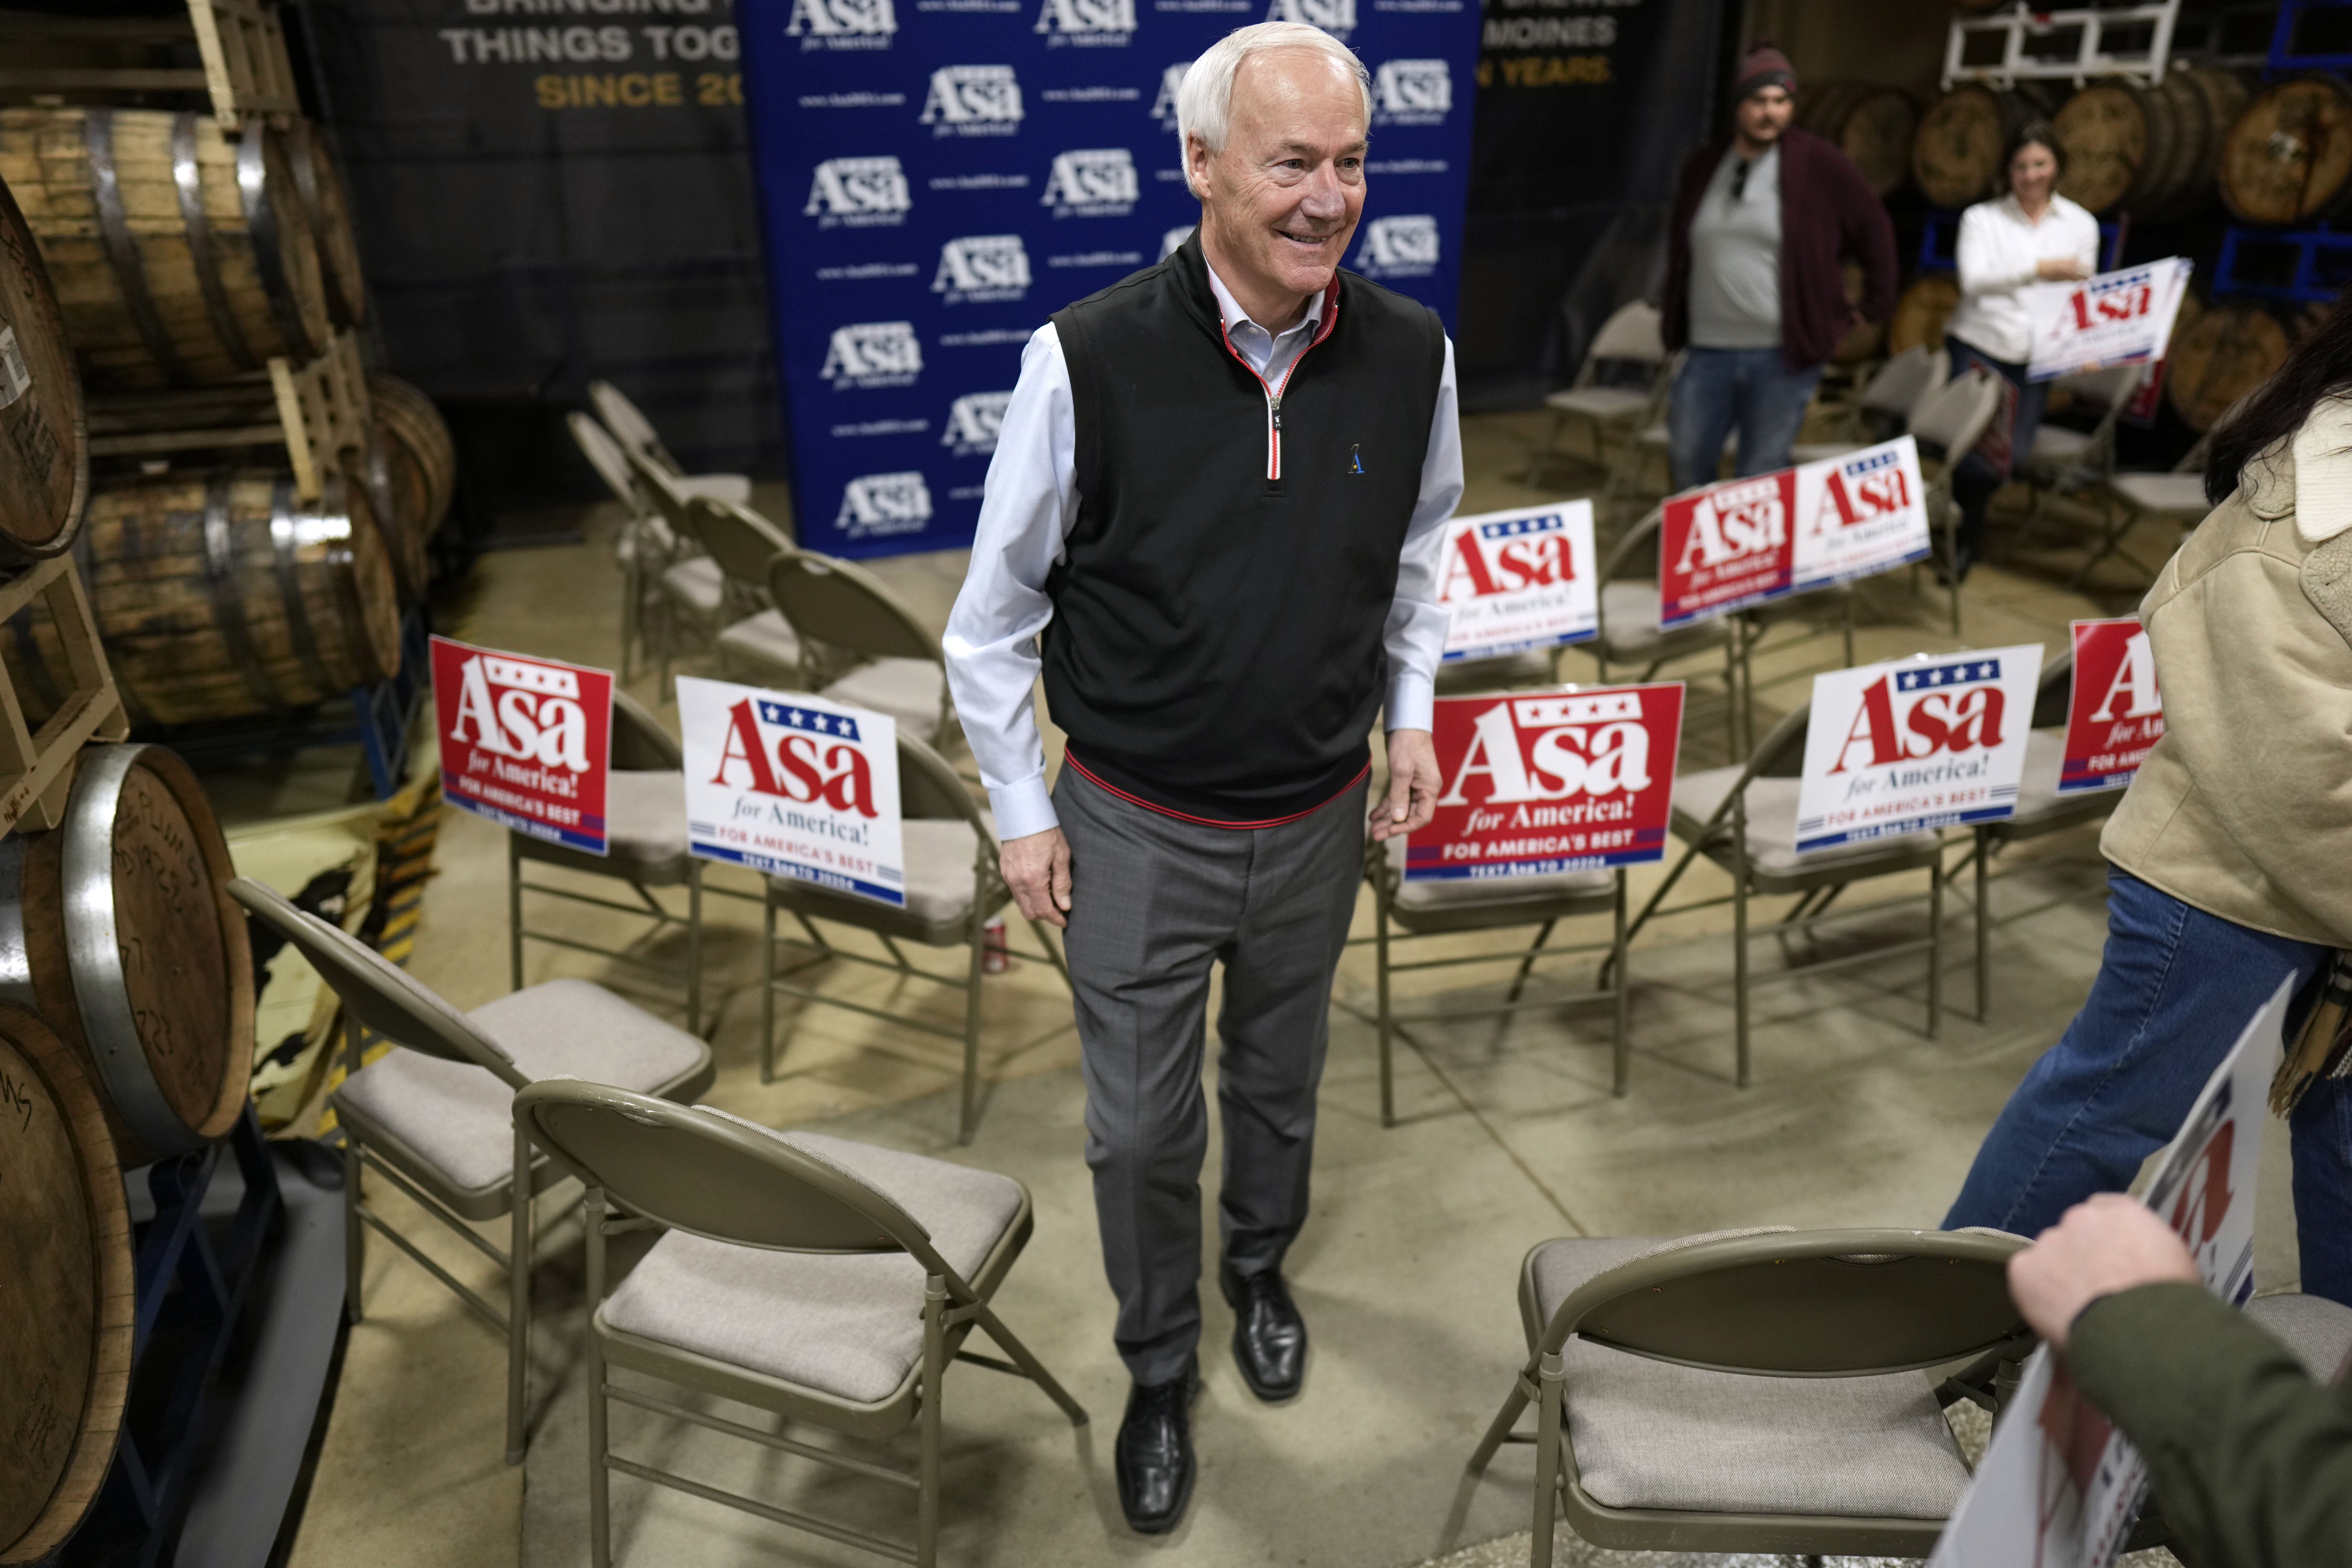 Former Arkansas Gov. Asa Hutchinson leaves a presidential campaign event in Des Moines, Iowa, on January 3.